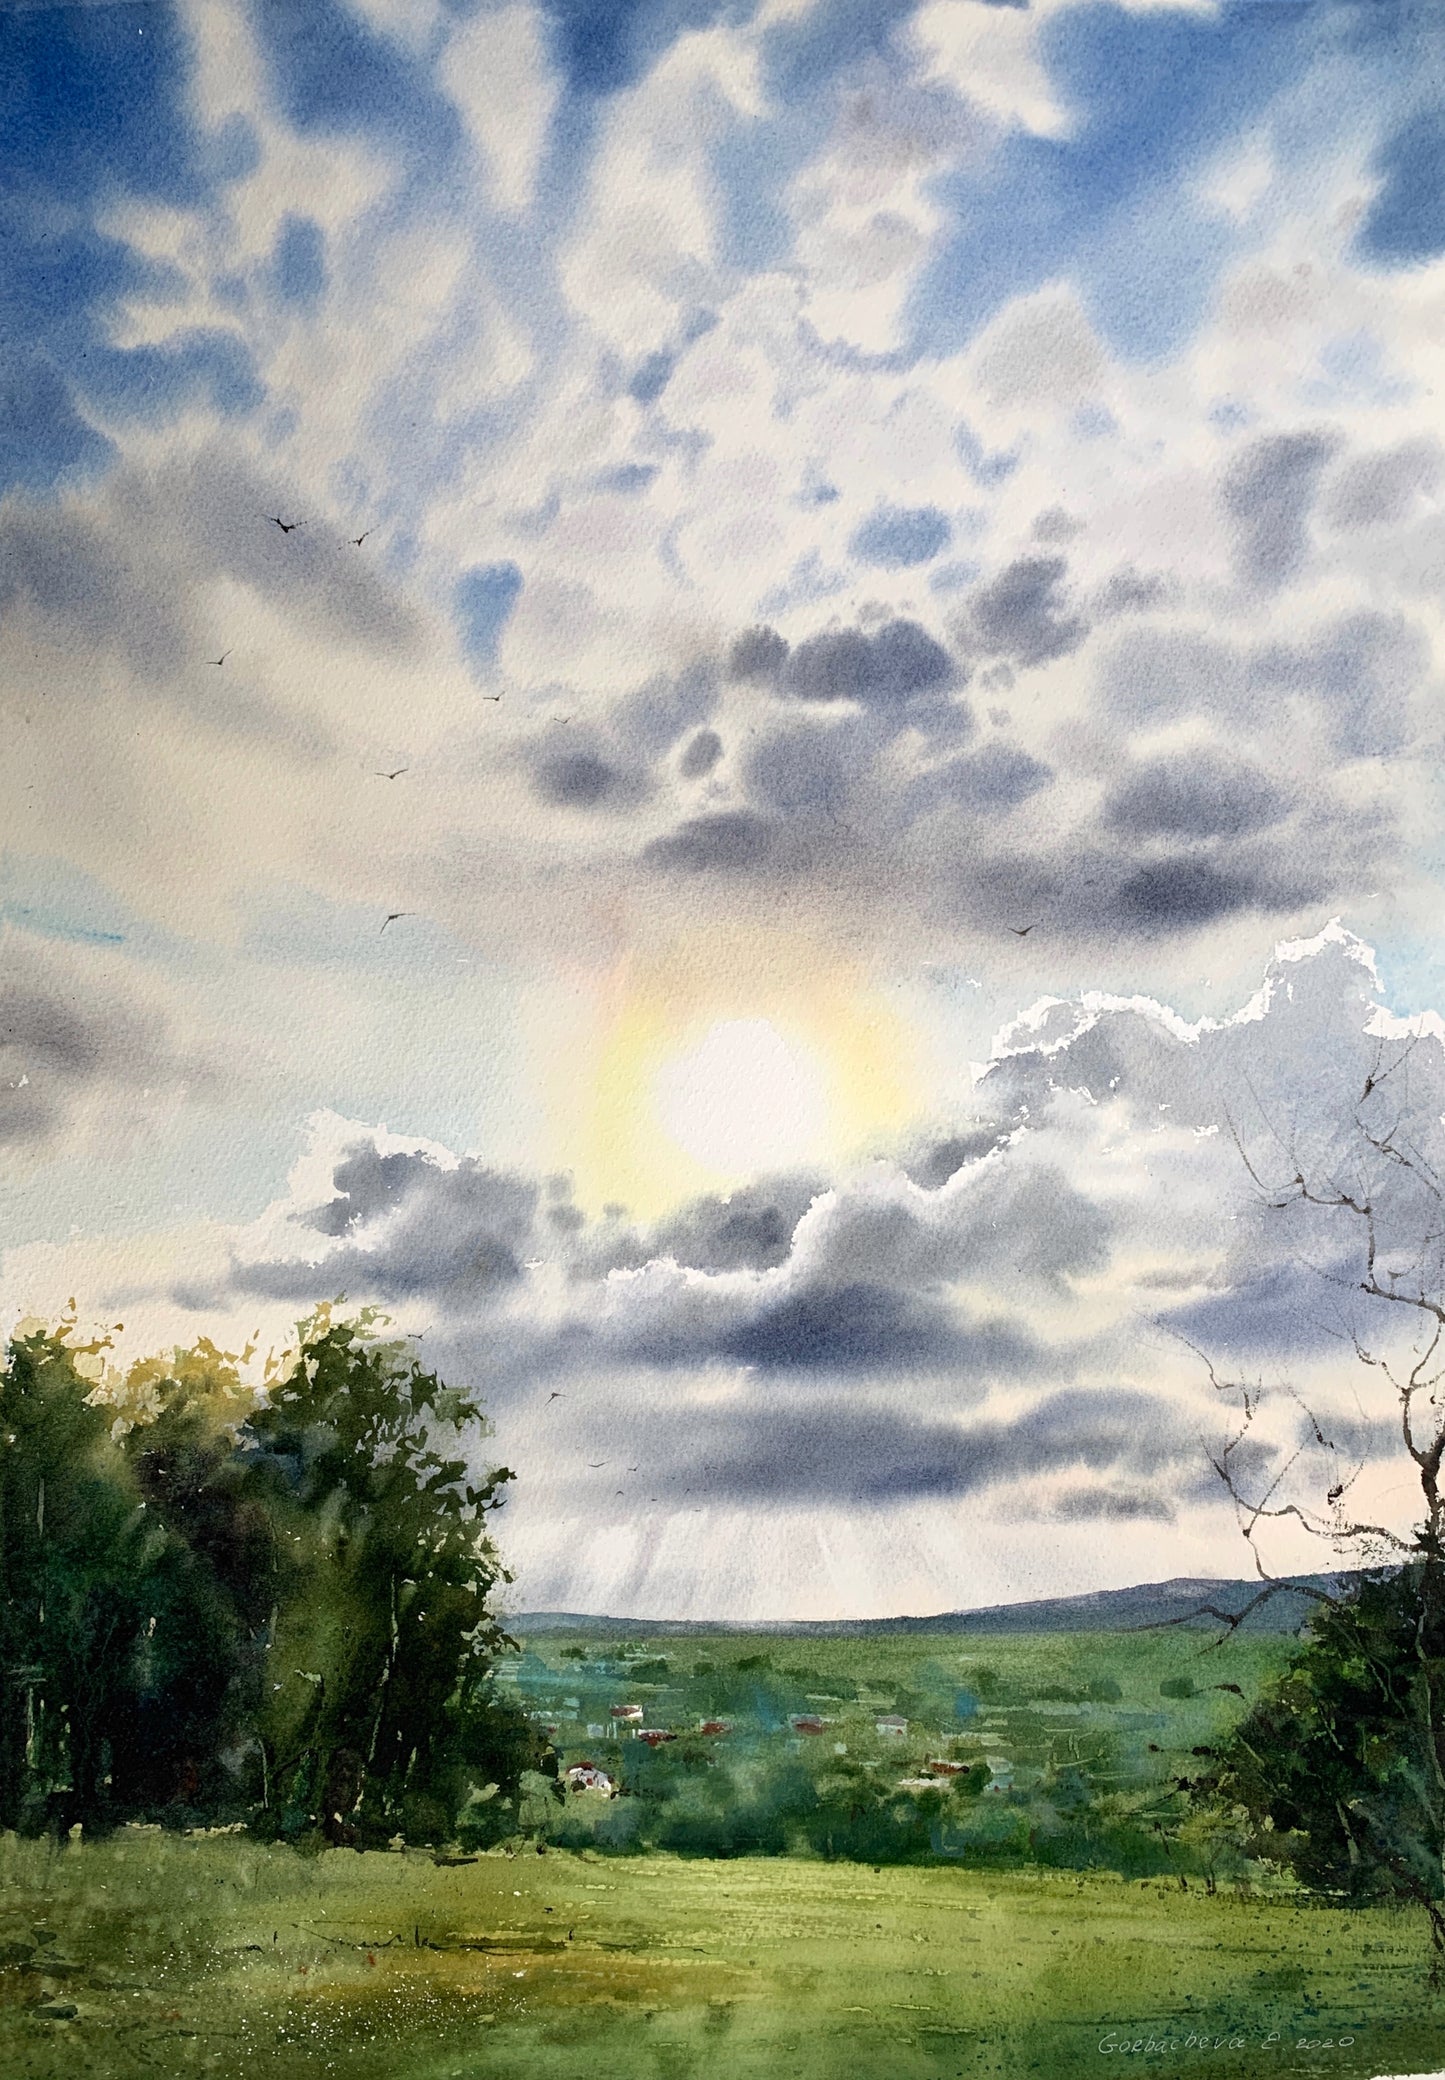 Rural Landscape Painting - Field and Clouds #2 - 15x22 in